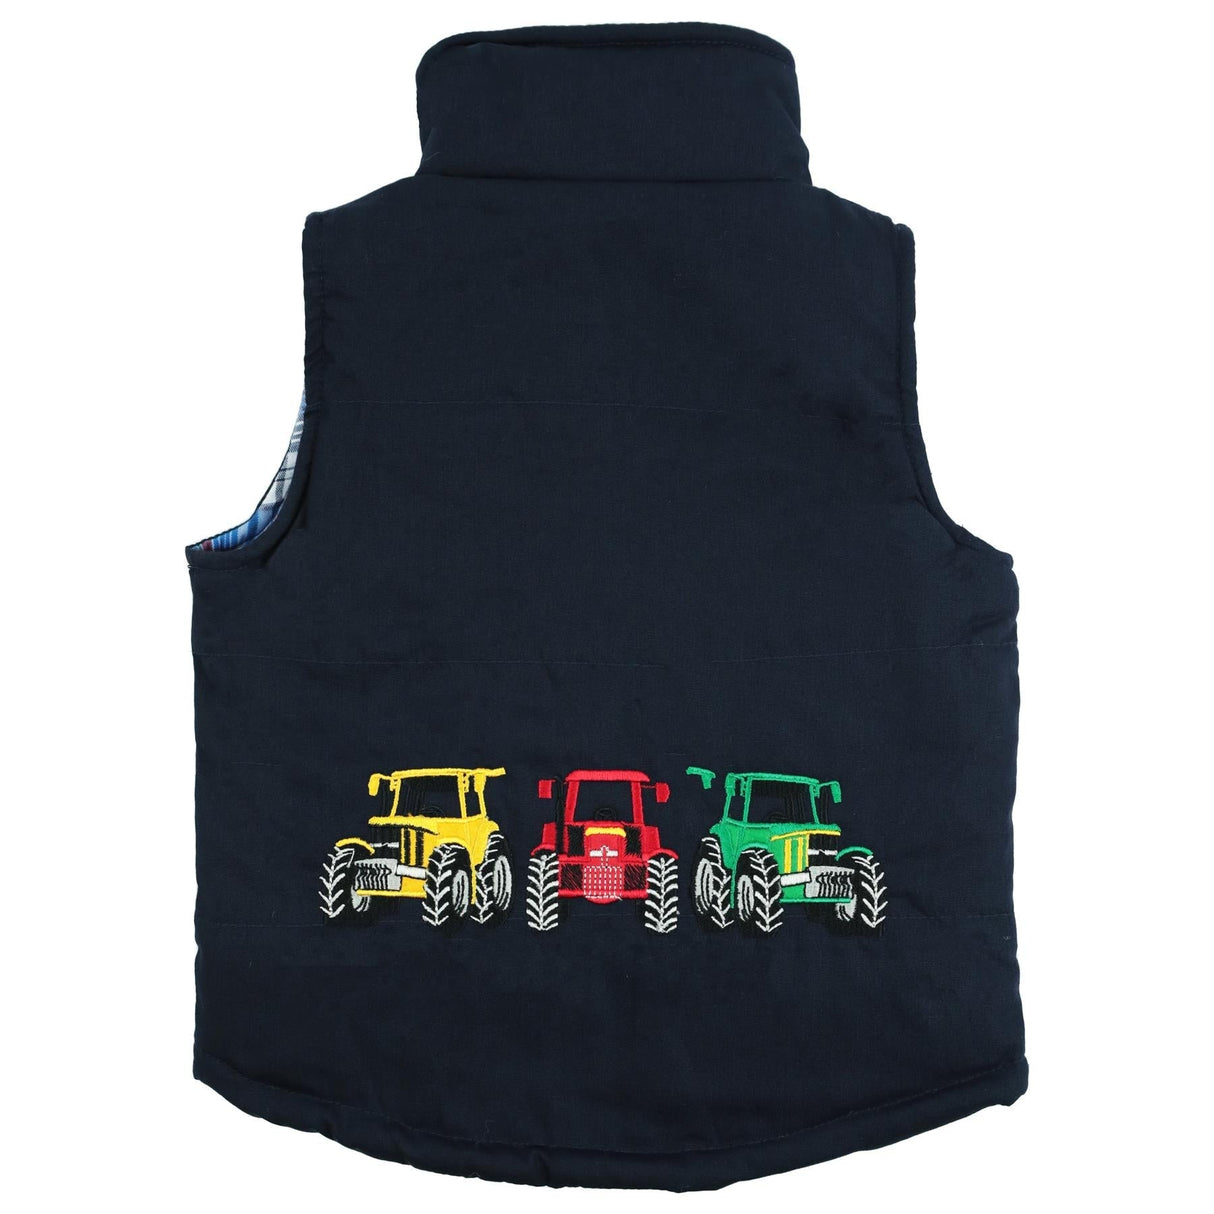 Hazy Blue Kids Country Padded Gilet - Just $19.99! Shop now at Warwickshire Clothing. Free Dellivery.